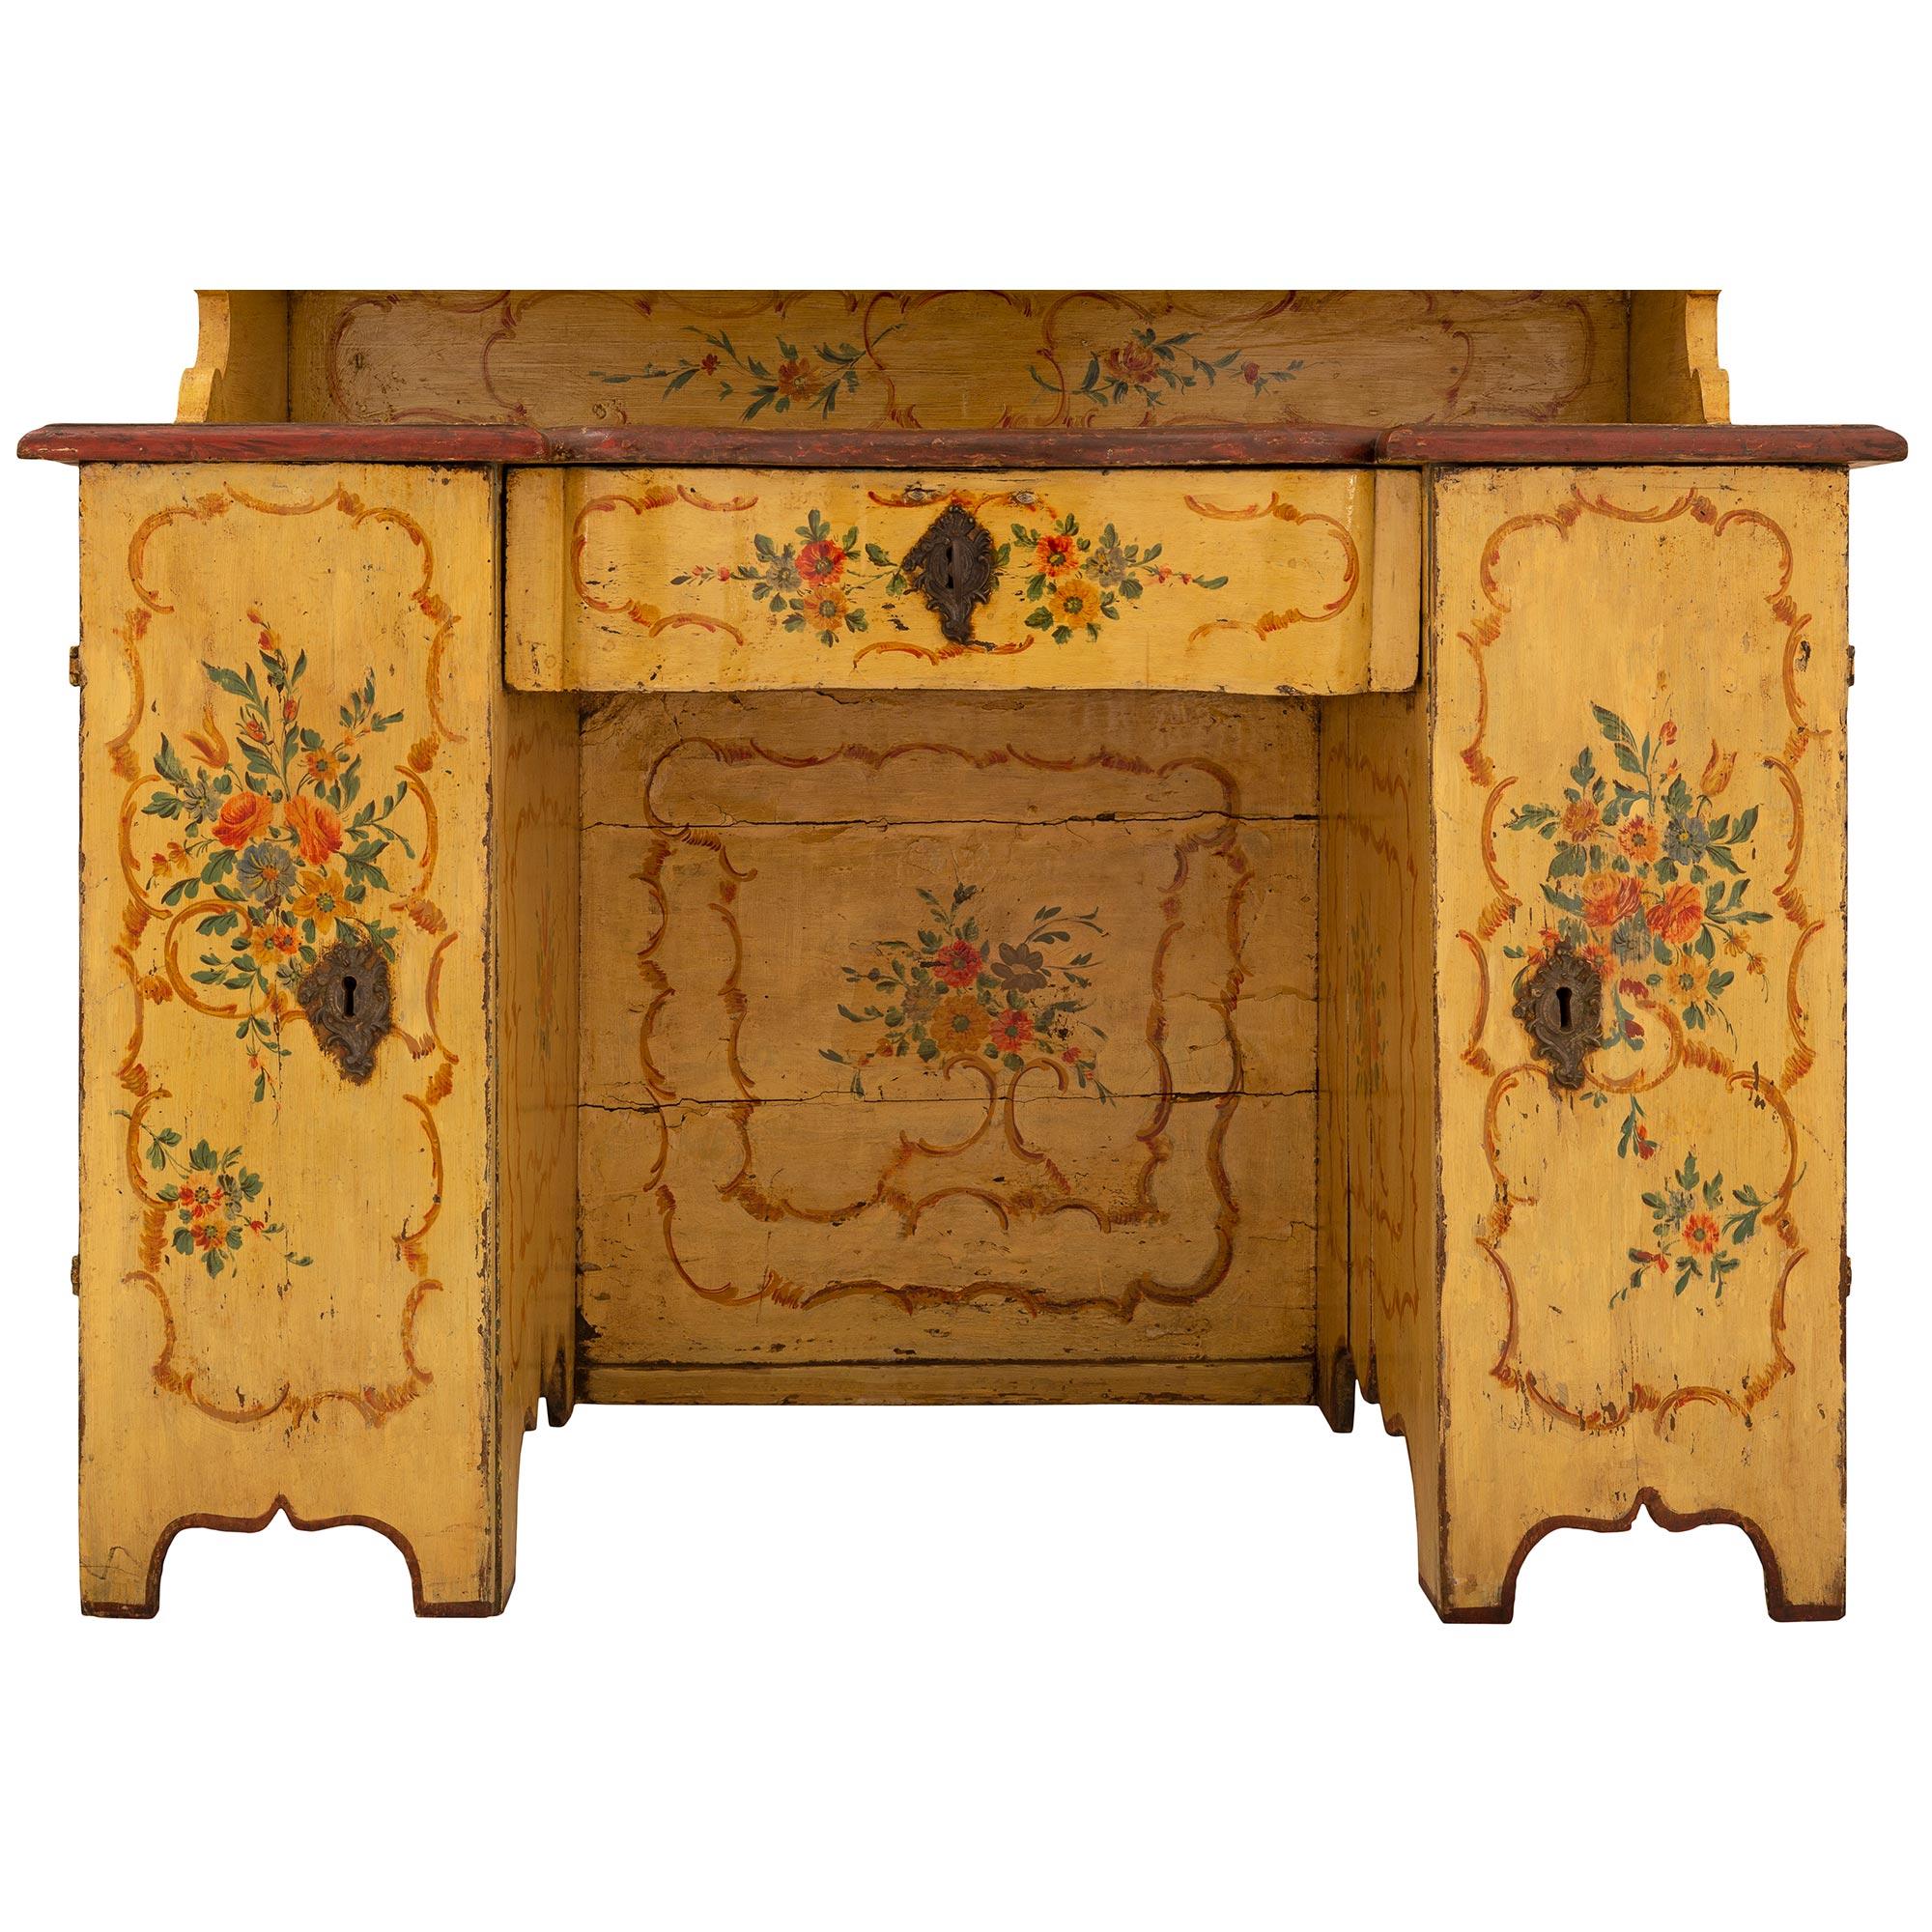 Italian Mid-18th Century Genovese St. Hand Painted Cabinet / Desk For Sale 5